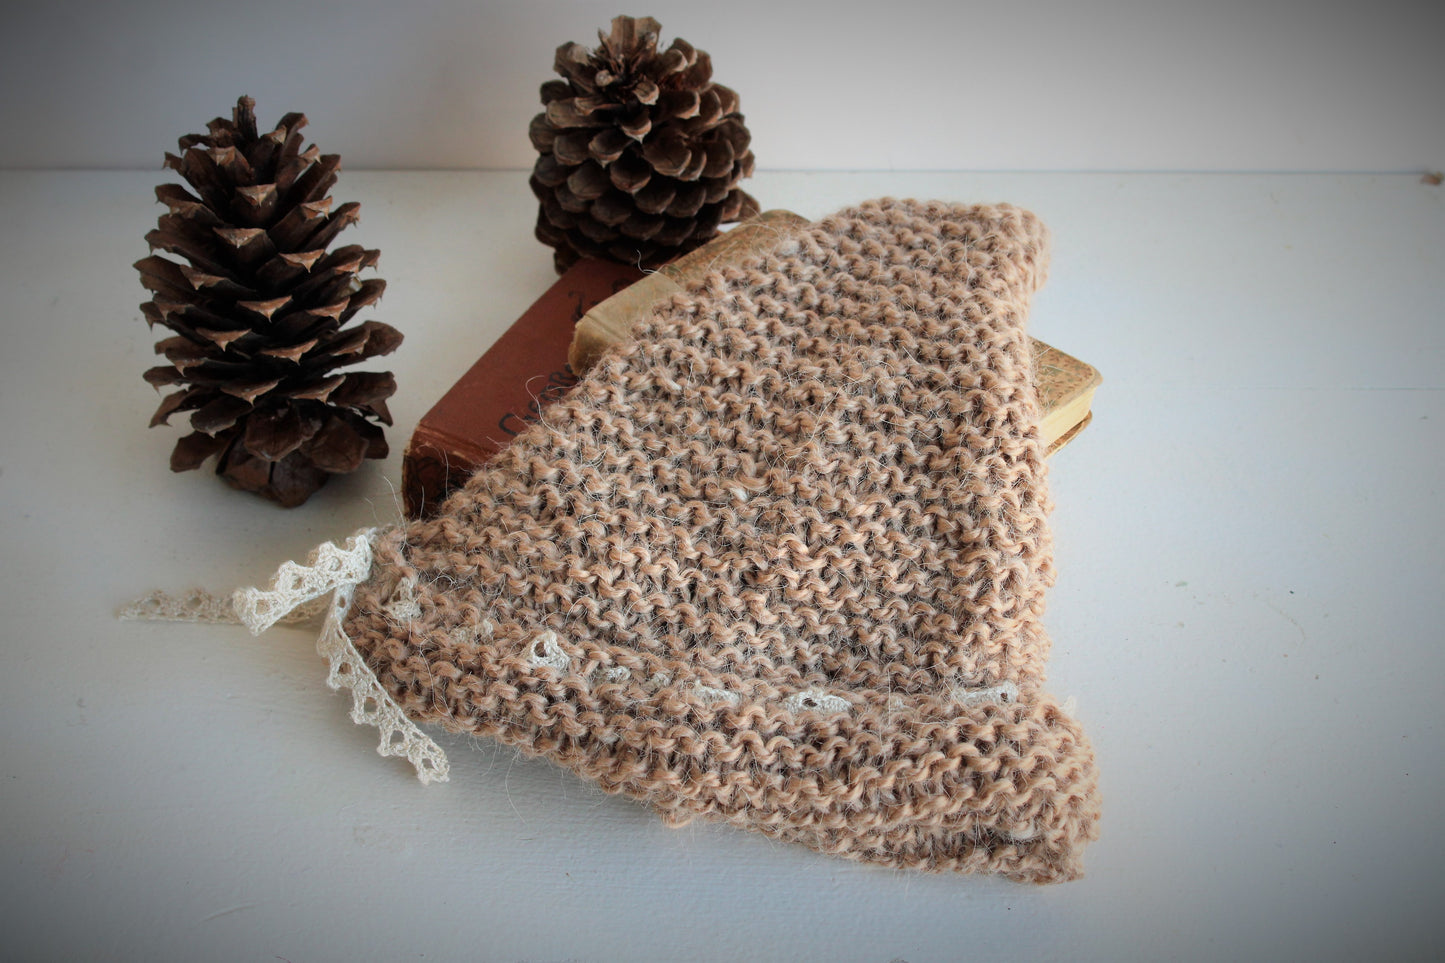 "Wood Elf" Handknit Beanie Hat in Light Taupe Brown, with Vintage Lace Bow